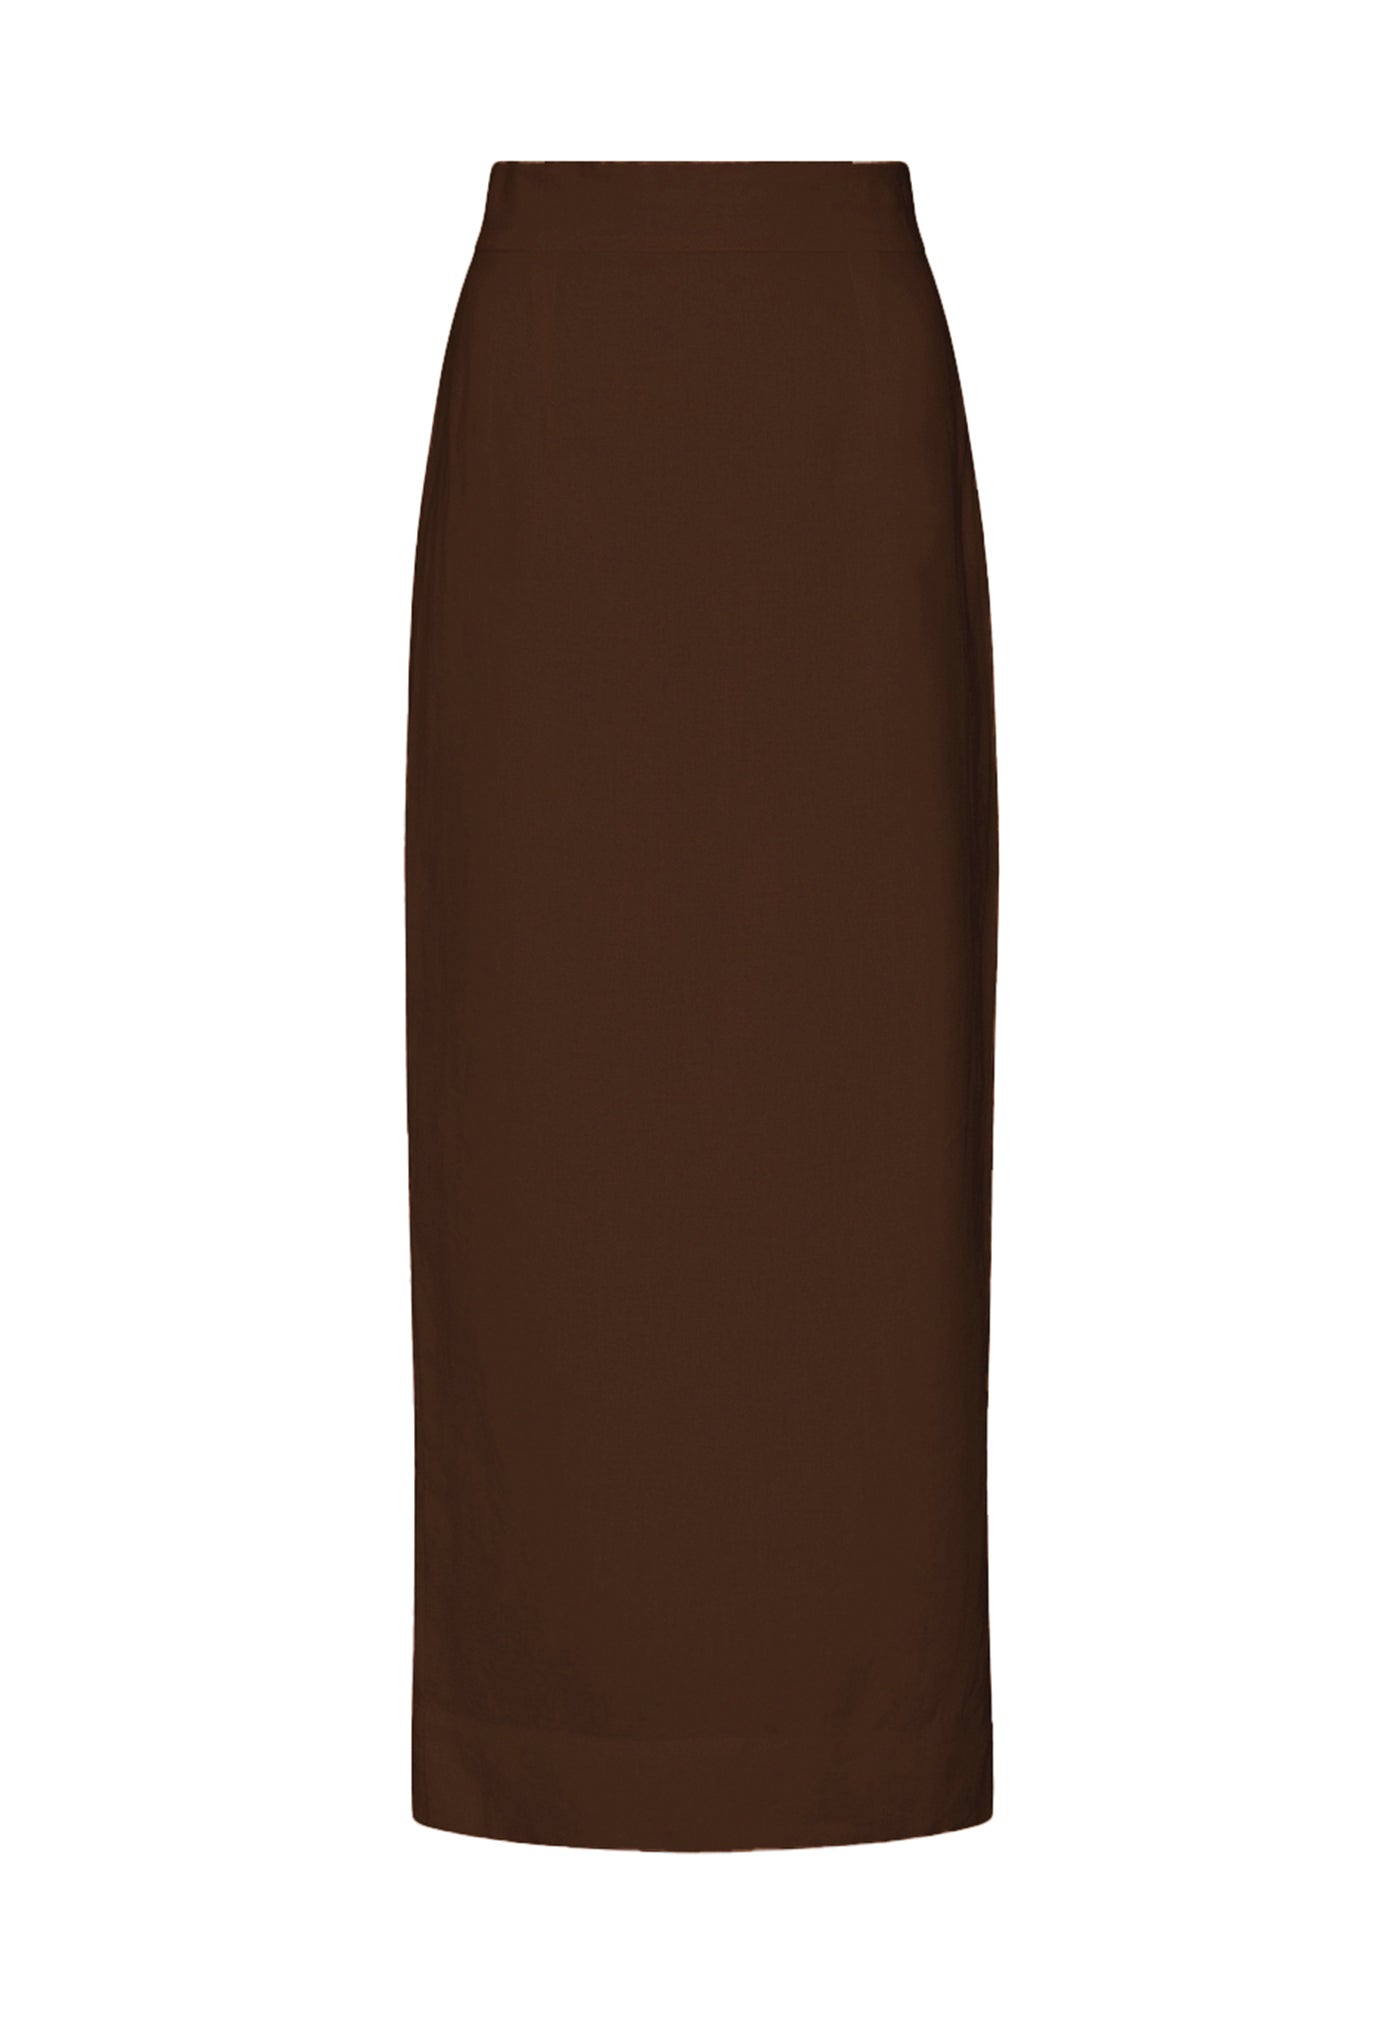 Emma Pencil Skirt - Chocolate sold by Angel Divine